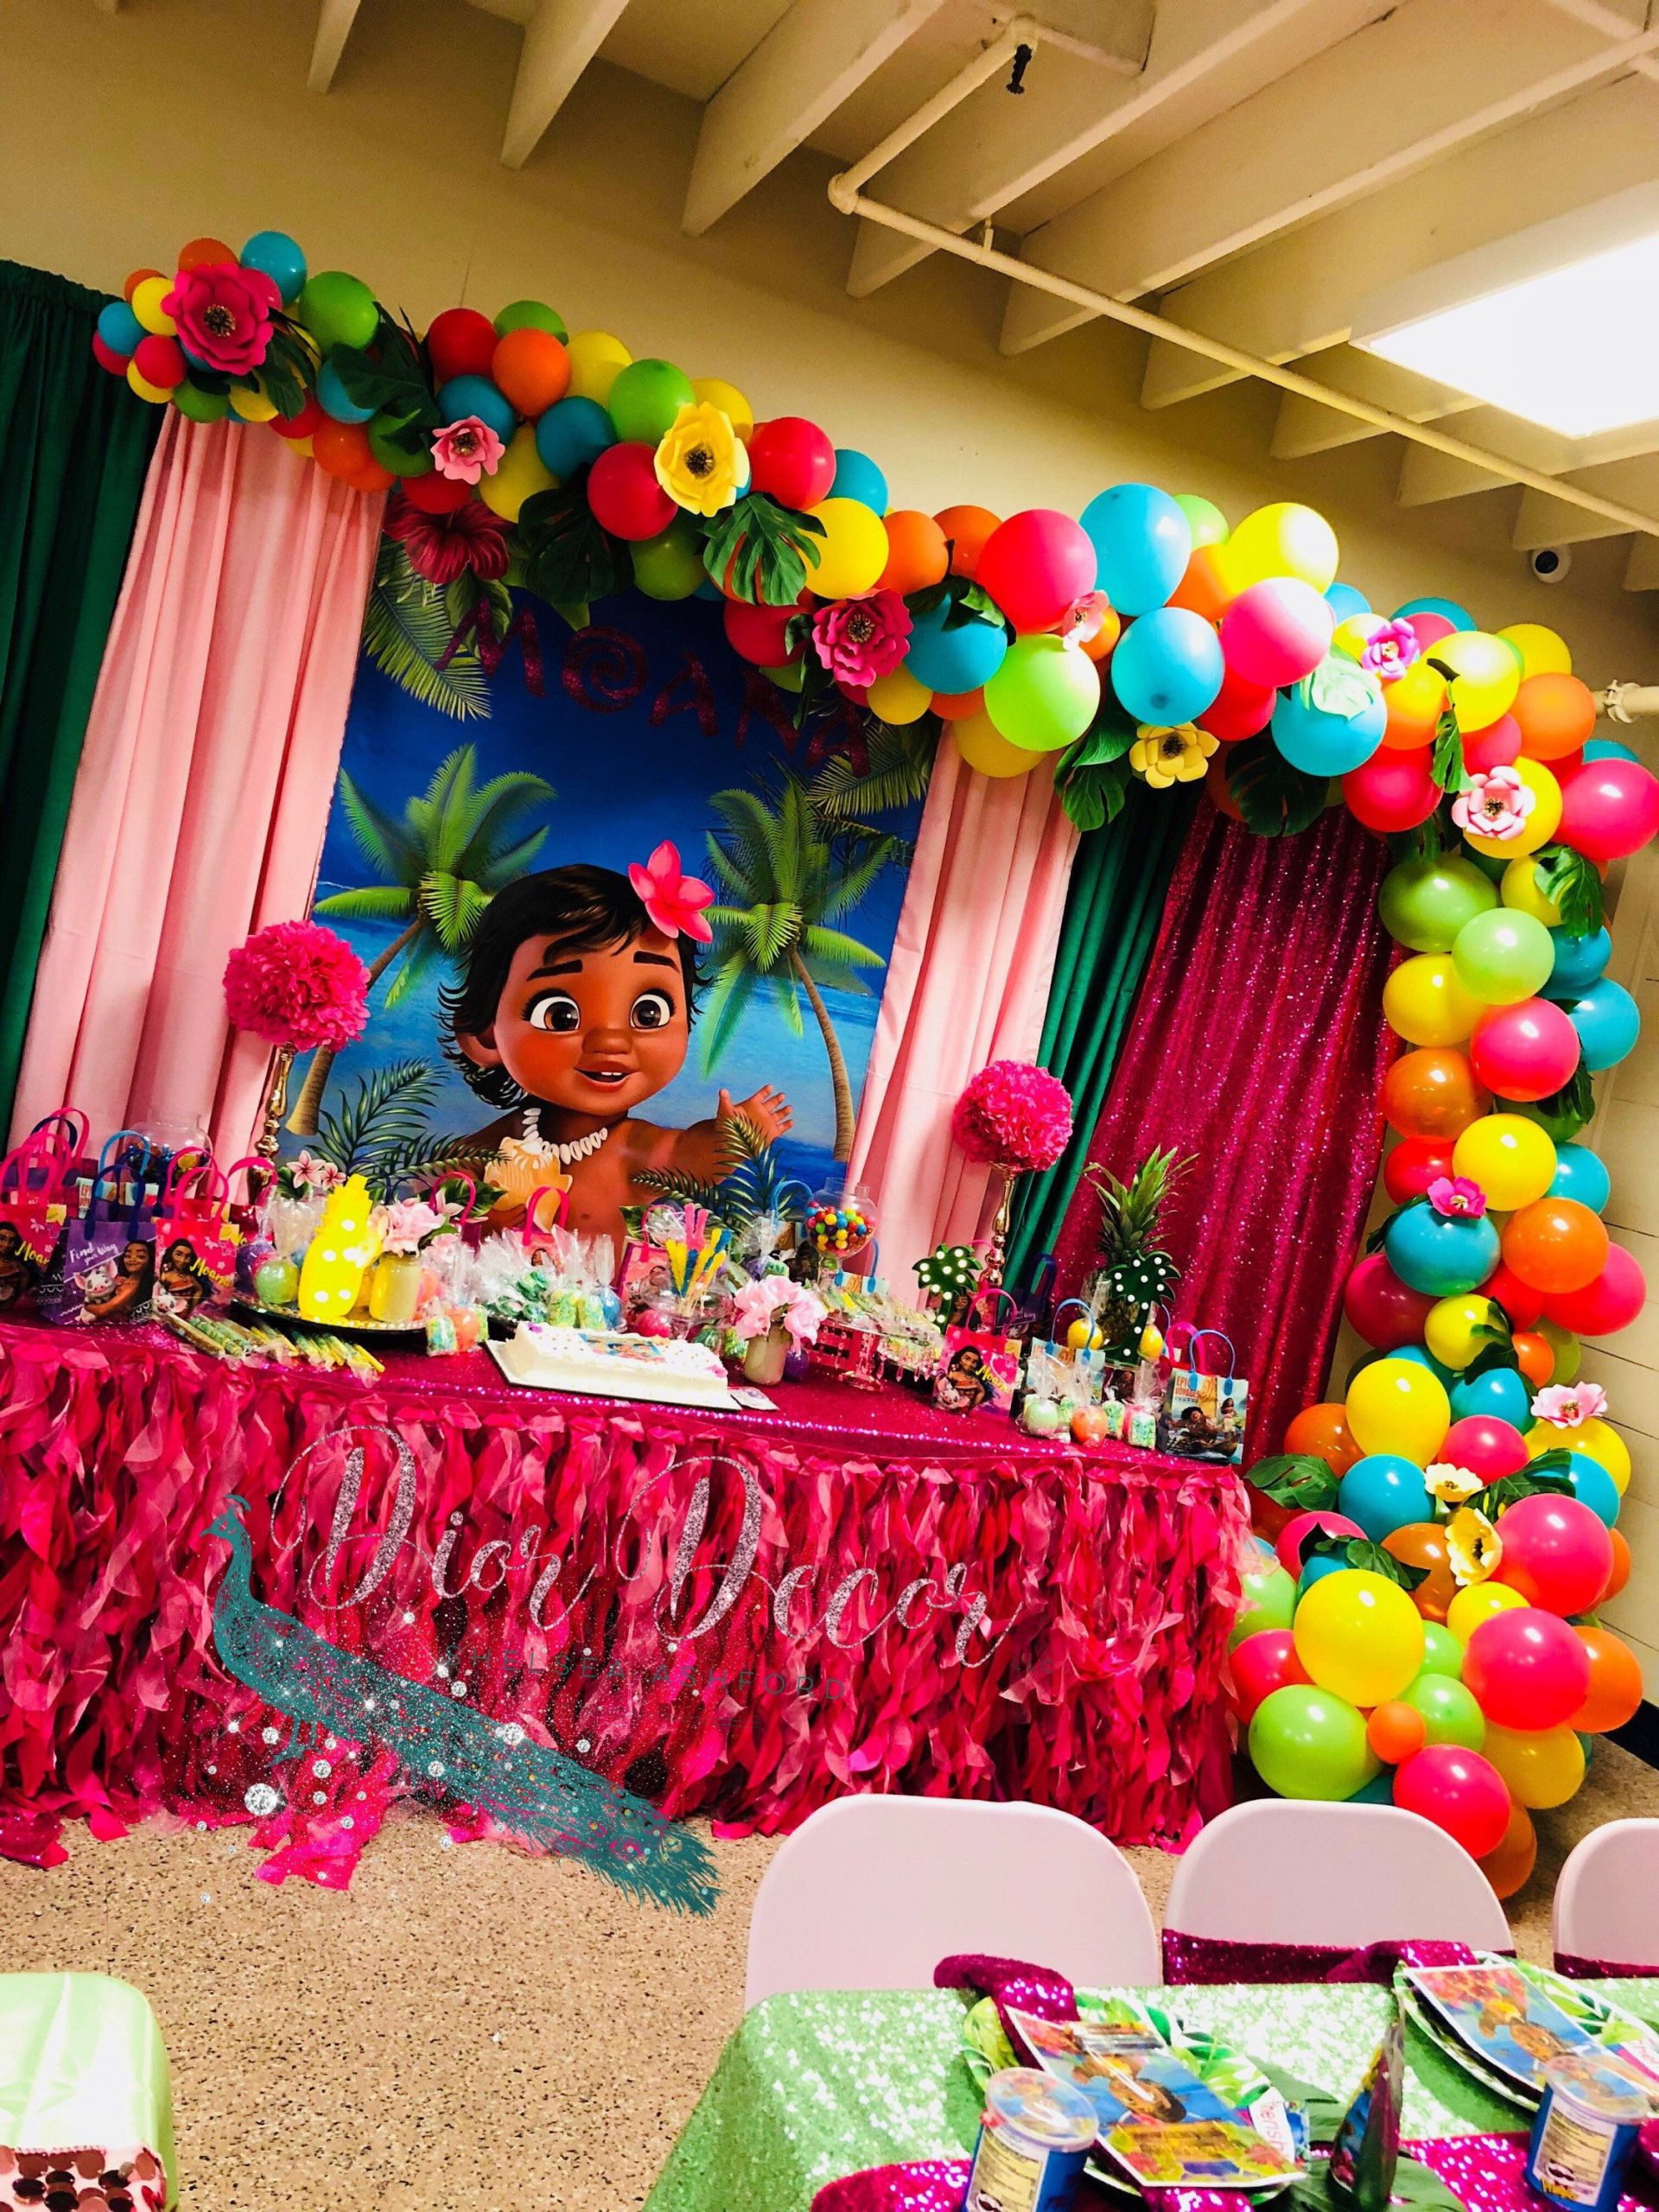 Baby Moana Party Decorations
 Pin by Kaleighs Creations on Backdrops in 2019